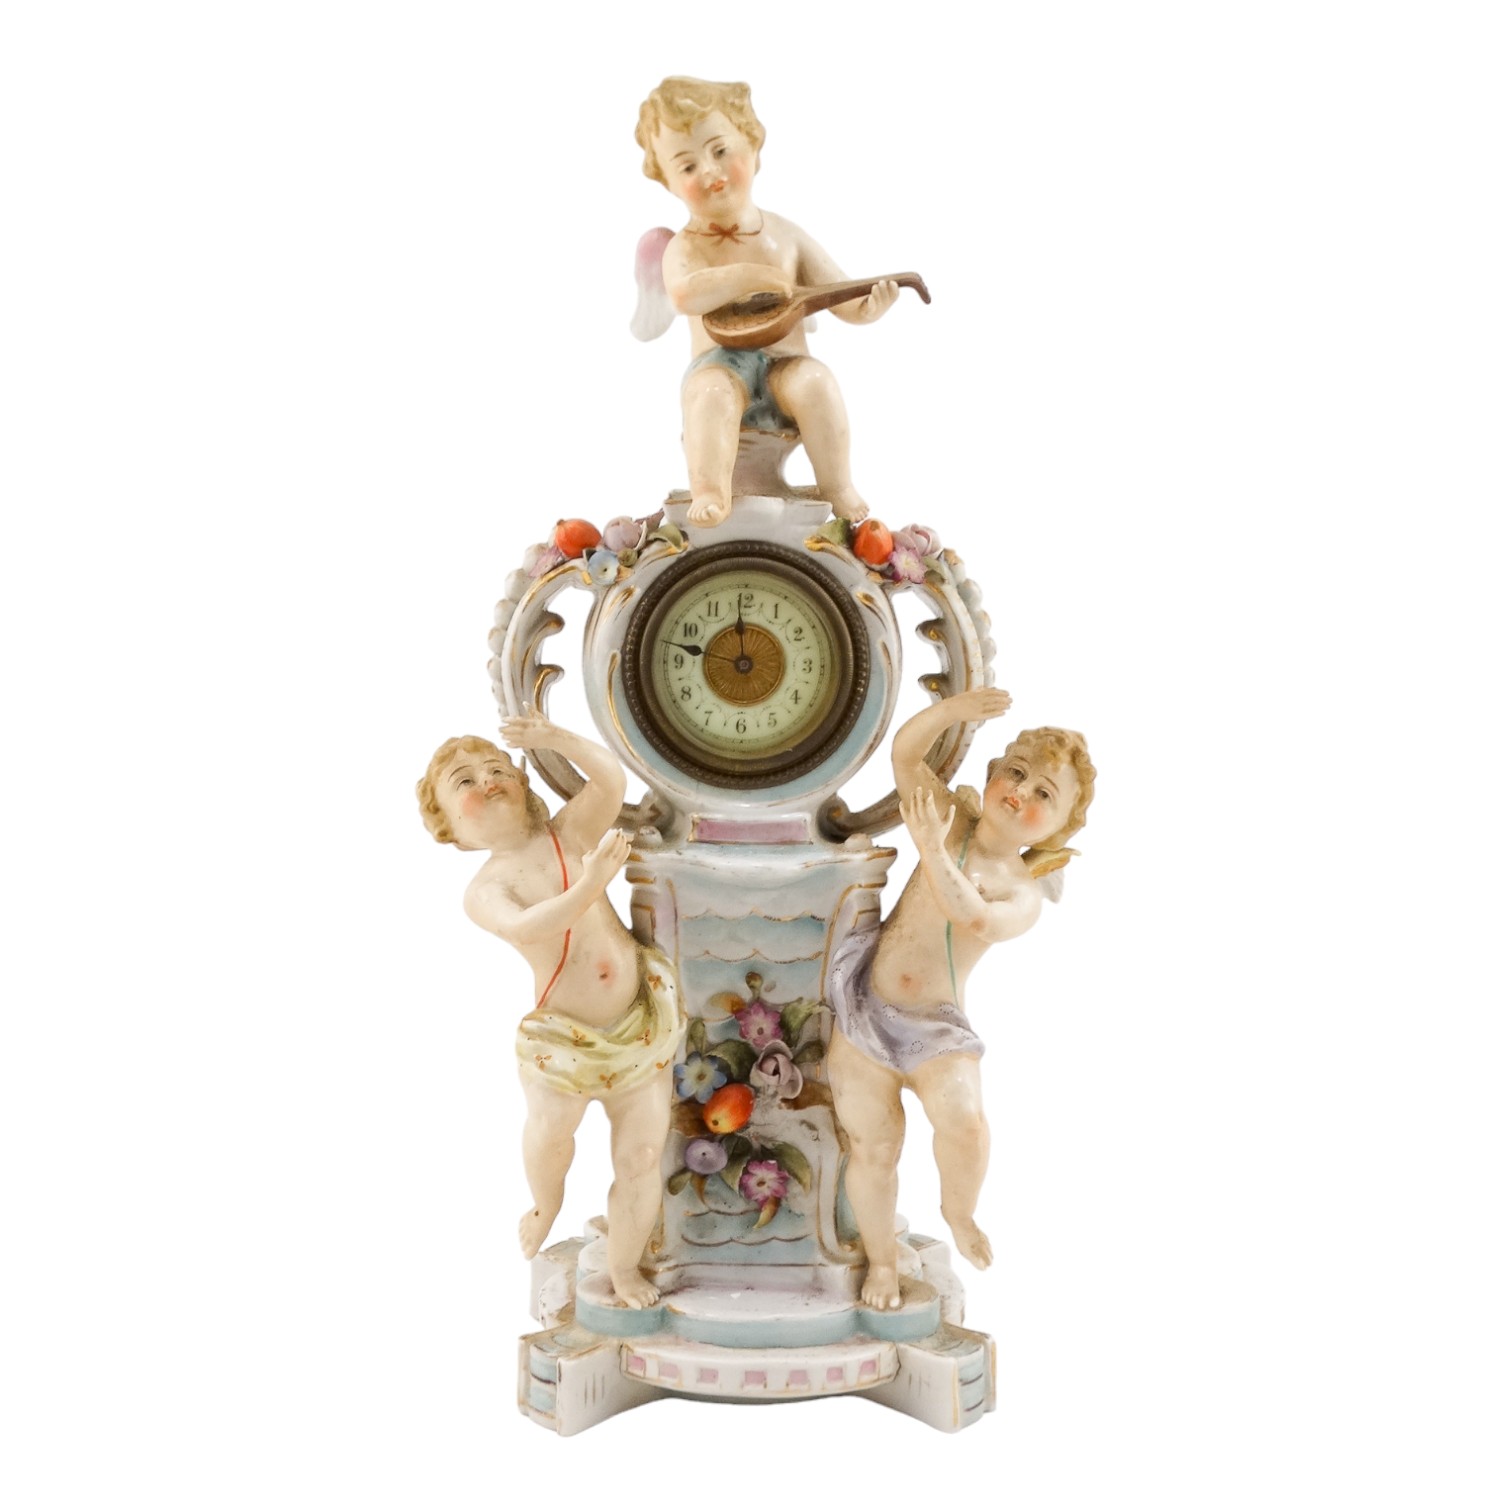 An early 20th century German porcelain mantel clock - modelled with three cherubs about a central